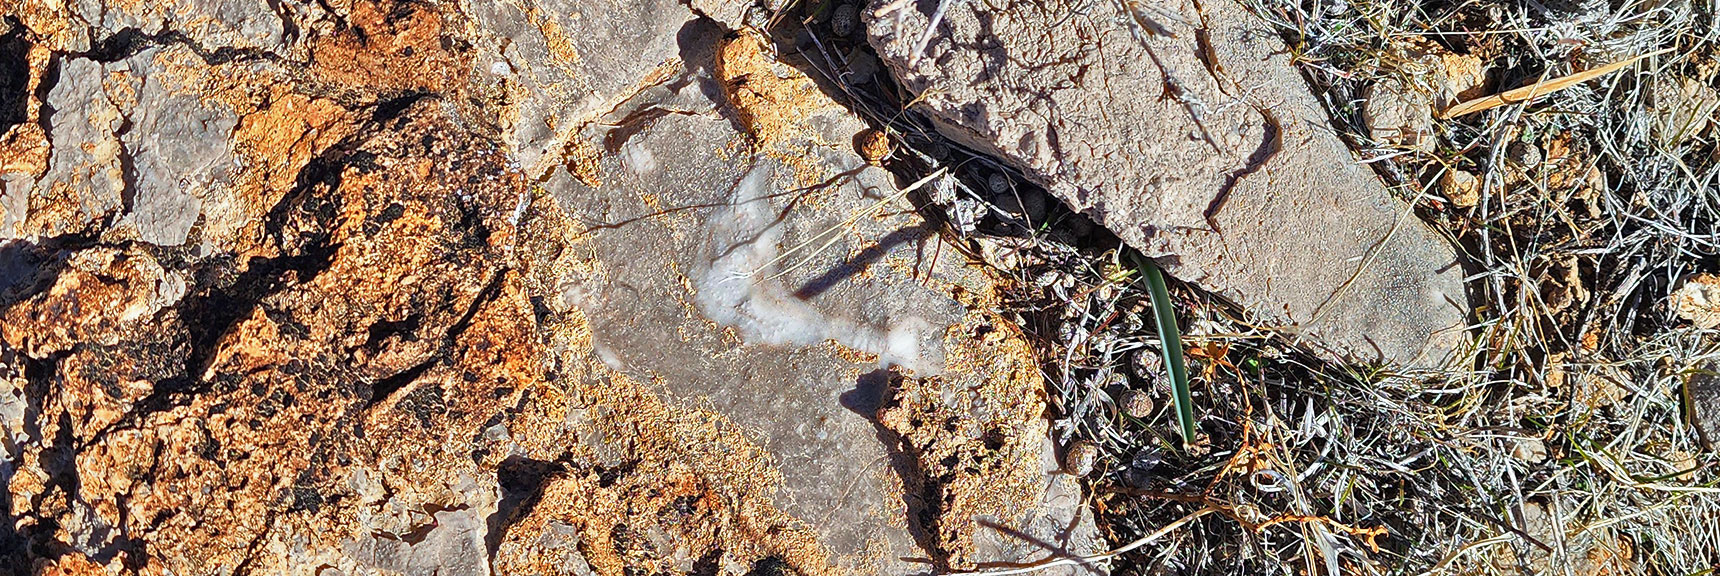 Not Sure What This is. Fossil Fish? Sea Plant? | Western Trails and Ridges | Blue Diamond Hill | Red Rock Canyon, Nevada